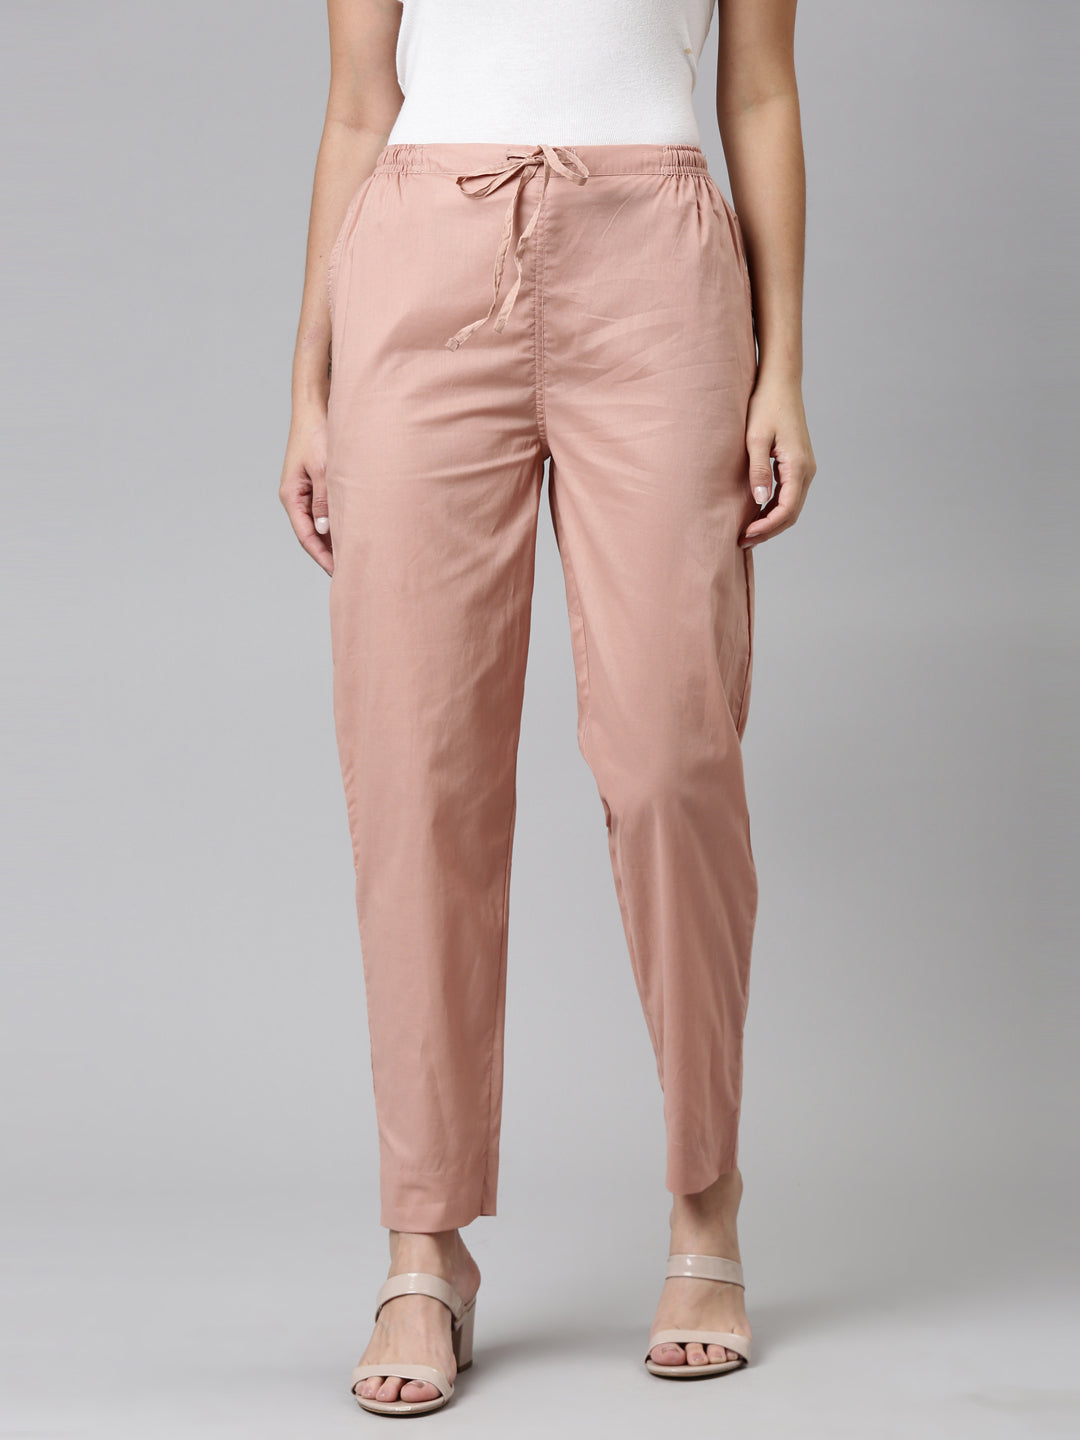 Wide linen-blend trousers - Light pink - Ladies | H&M IN